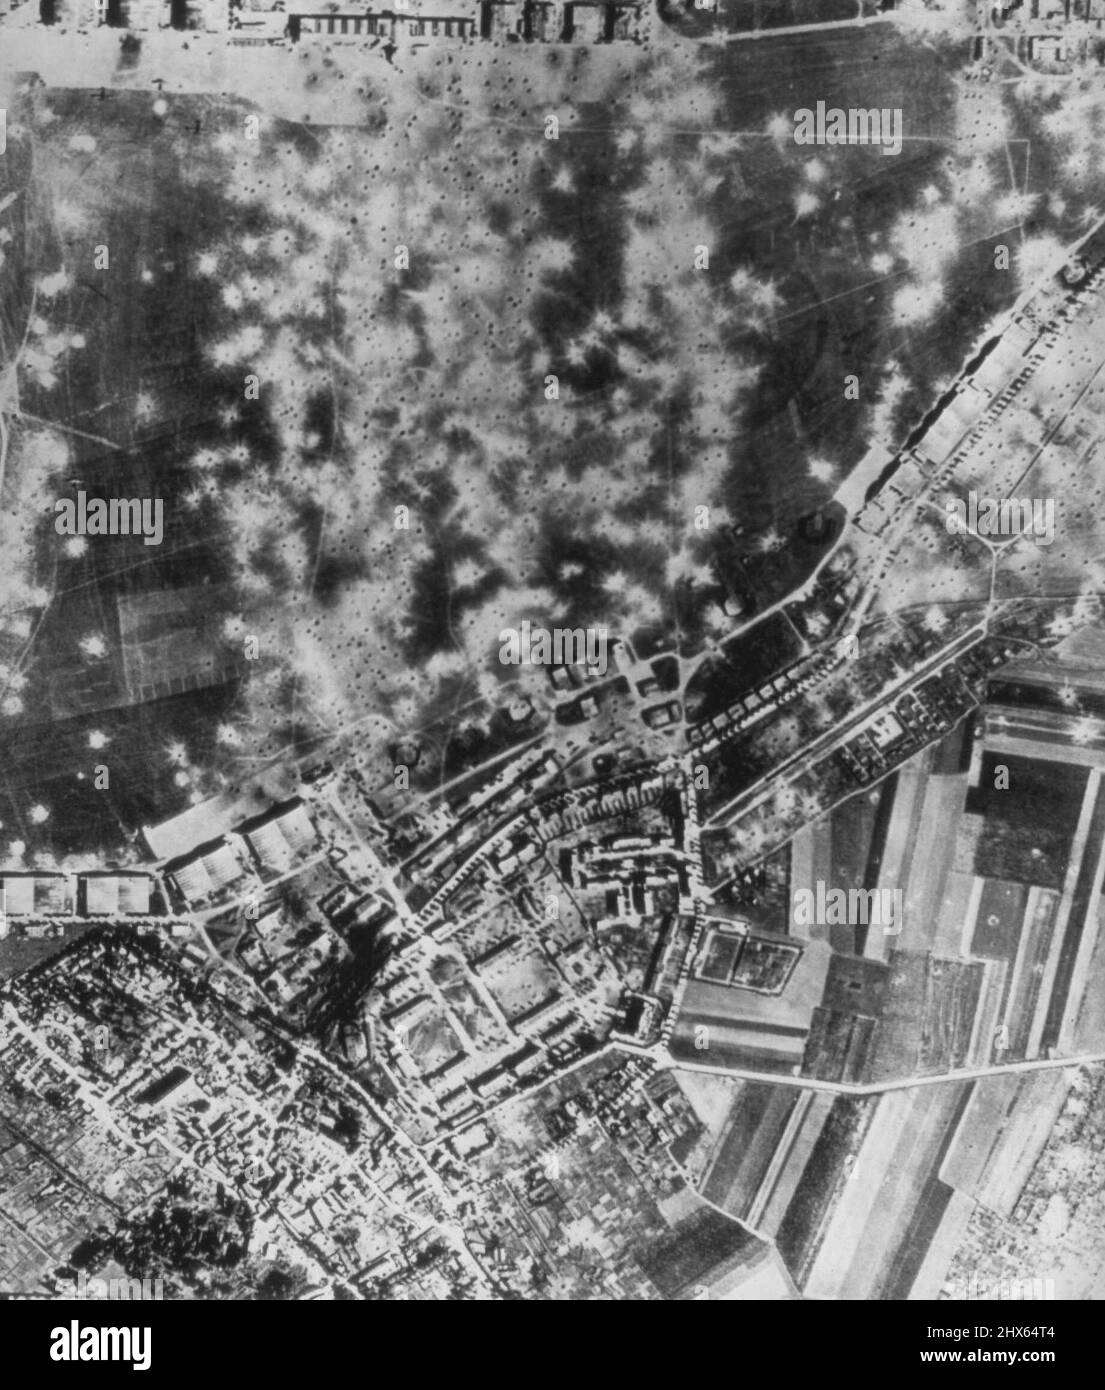 One Way To Ground Enemy Planes -- This picture of Le Bourget airfield at Paris shows one method flying fortresses based in England use to ground German Planes. It's simply just blast the field and the buildings about it full of holes. This was the result of a recent attack. Today with Allied Forces swarming into Italy, the greatest fleet of American and British bombers ever hurled across the channel pounded enemy ports and airfields in Northern France. September 9, 1943. (Photo by AP Wirephoto). Stock Photo